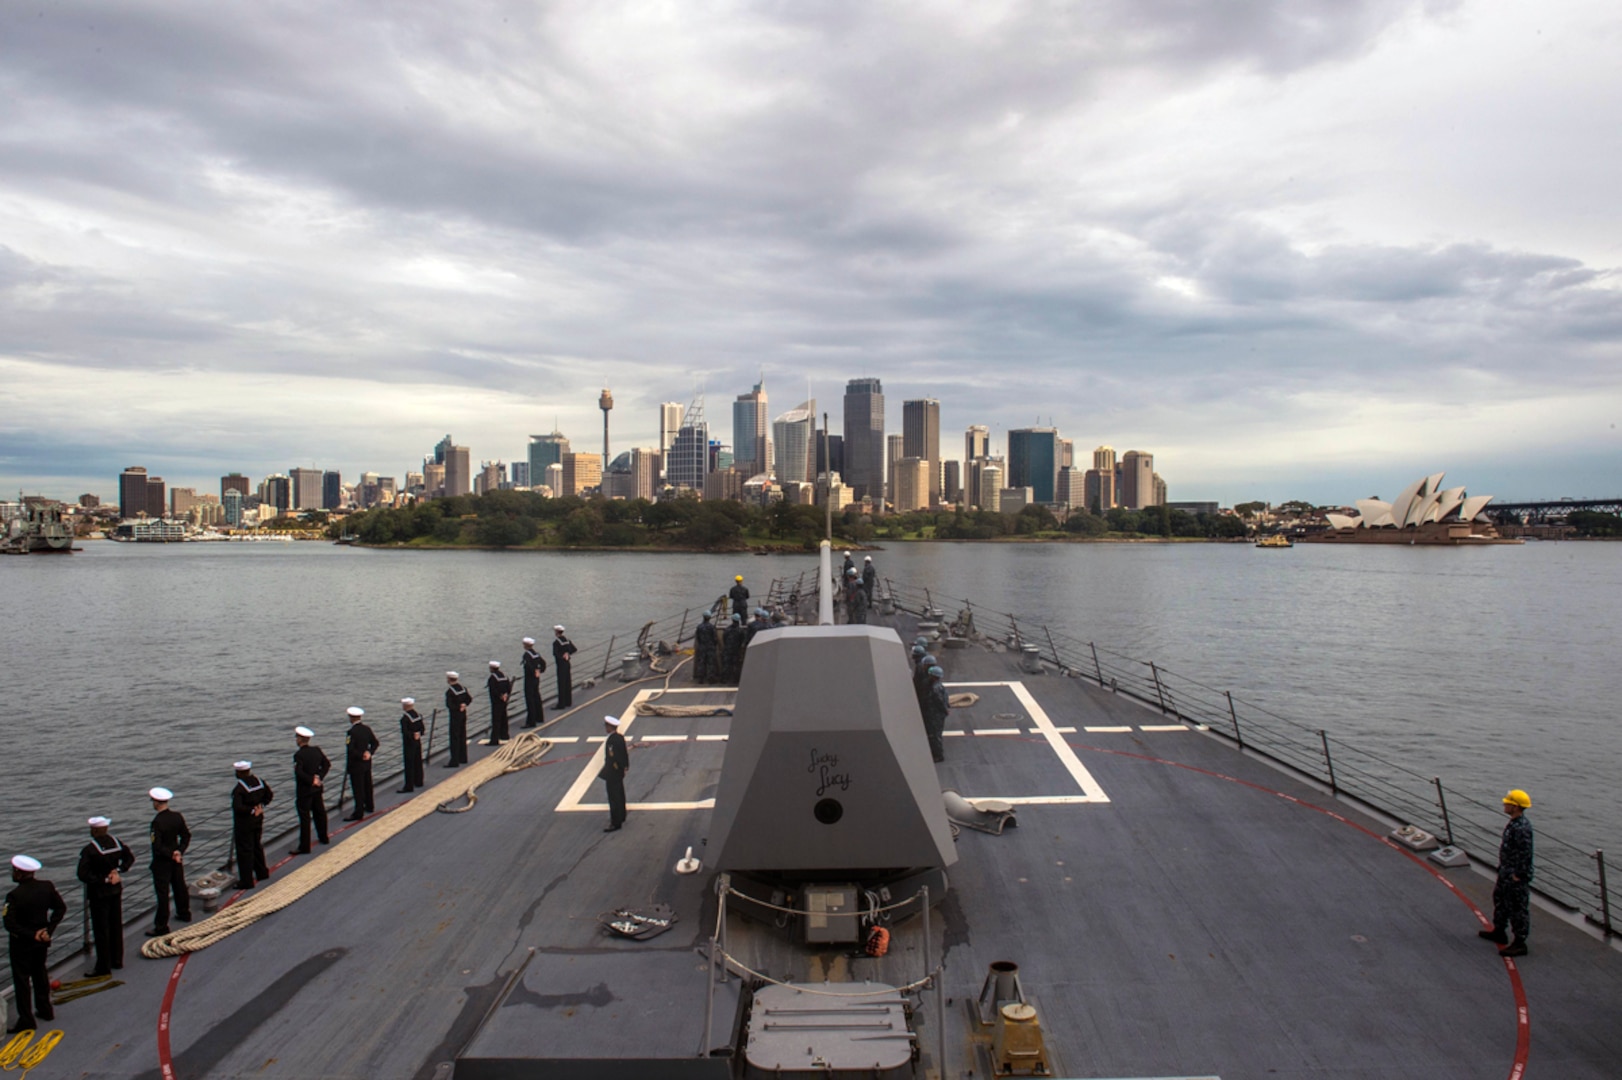 SYDNEY (June 17, 2015) - The Arleigh Burke-class guided-missile destroyer USS Mustin (DDG 89) transits through the Sydney Harbor as she prepares to moor for a port visit. Mustin is on patrol in the U.S. 7th Fleet area of responsibility in support of security and stability in the Indo-Asia-Pacific region. 